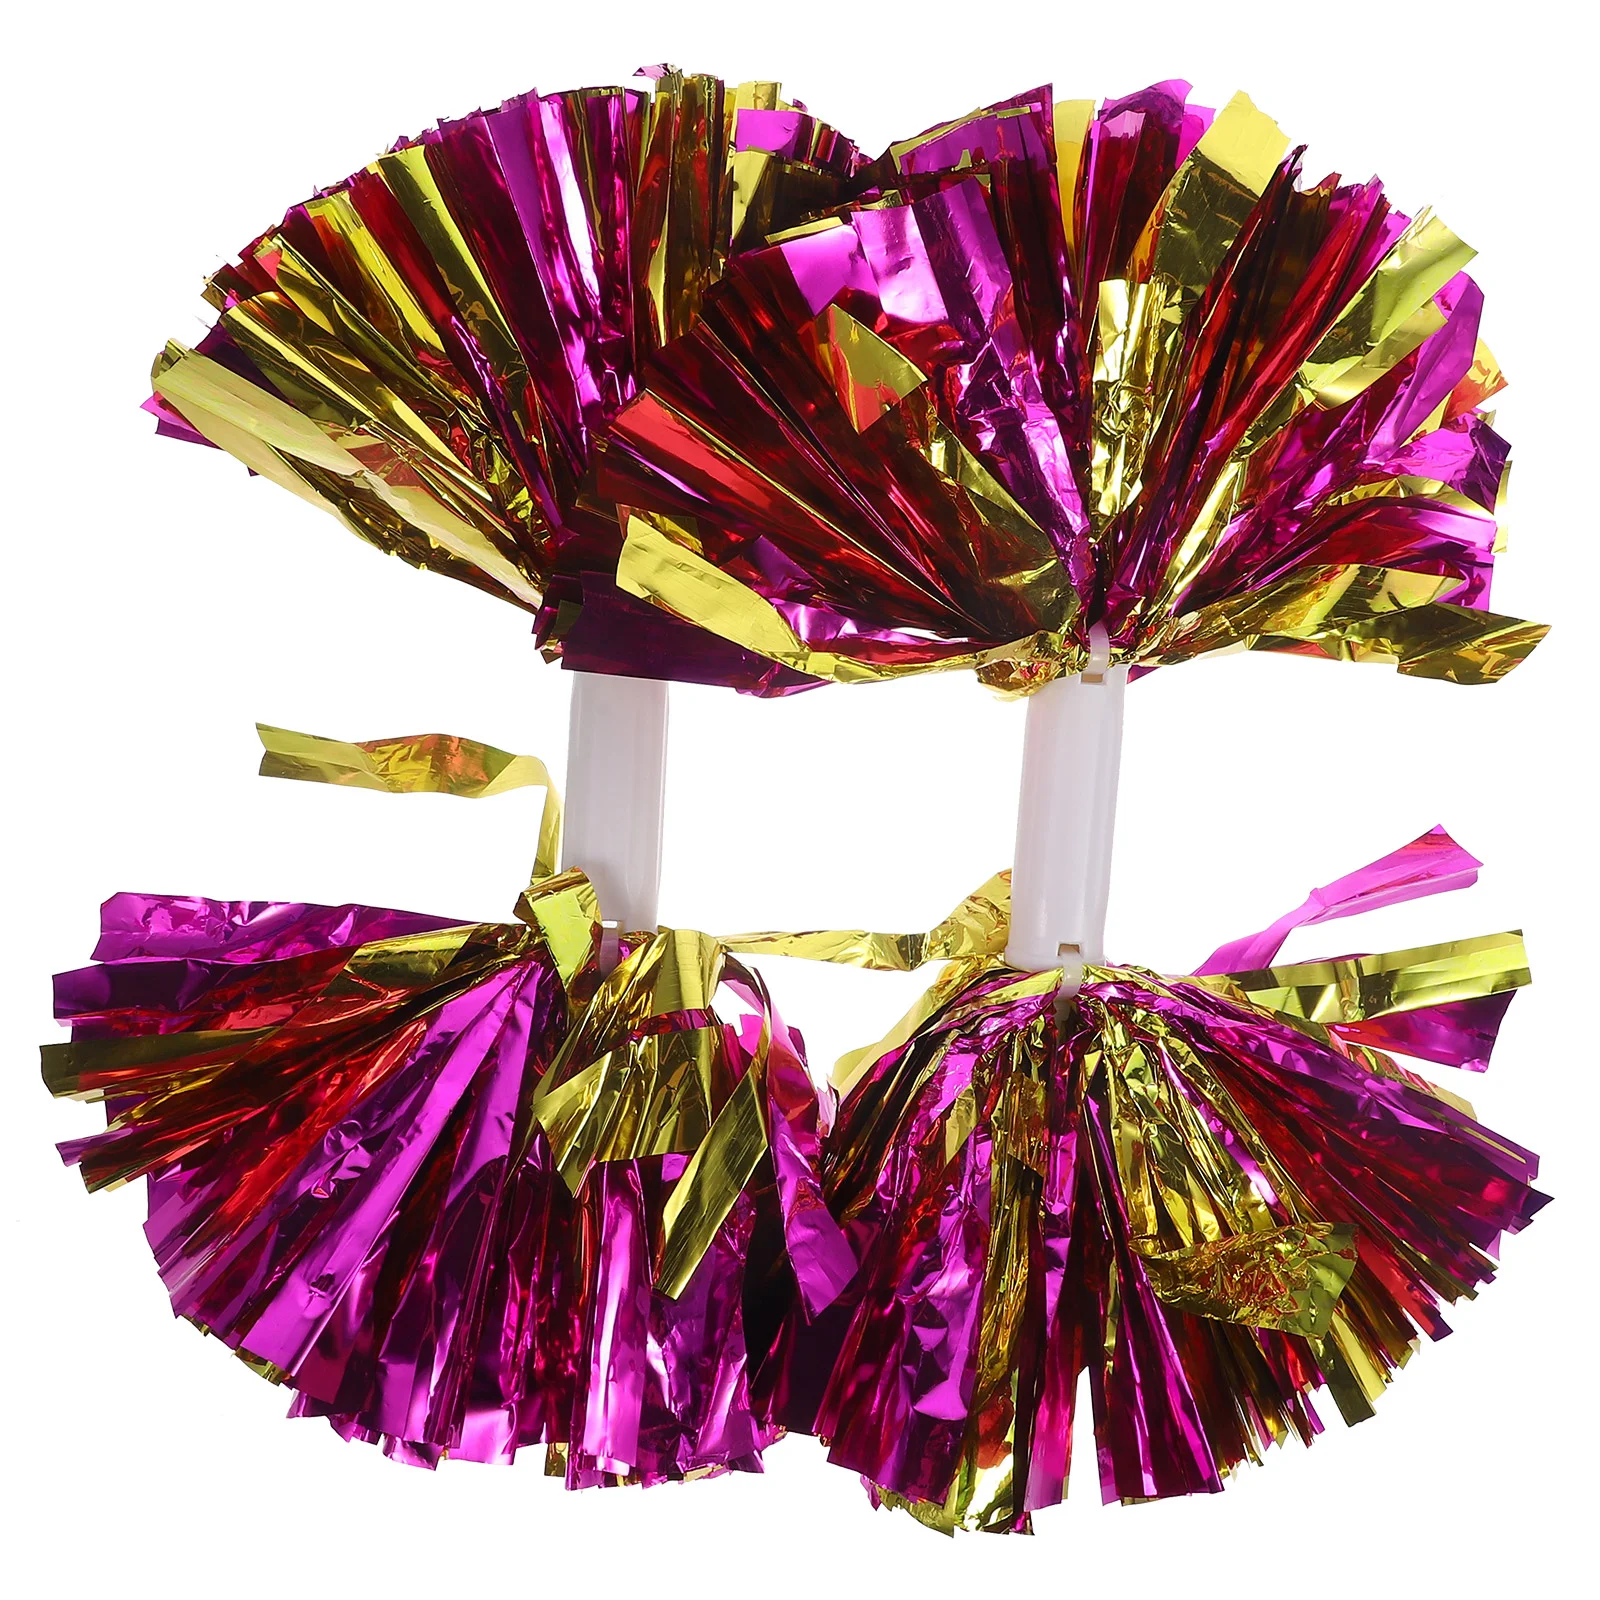 

2 Pcs Cheerleading Flower Ball Portable Props Bouquet Pom Poms Dancing Performance Pompom The Pet Cheerleader Accessories